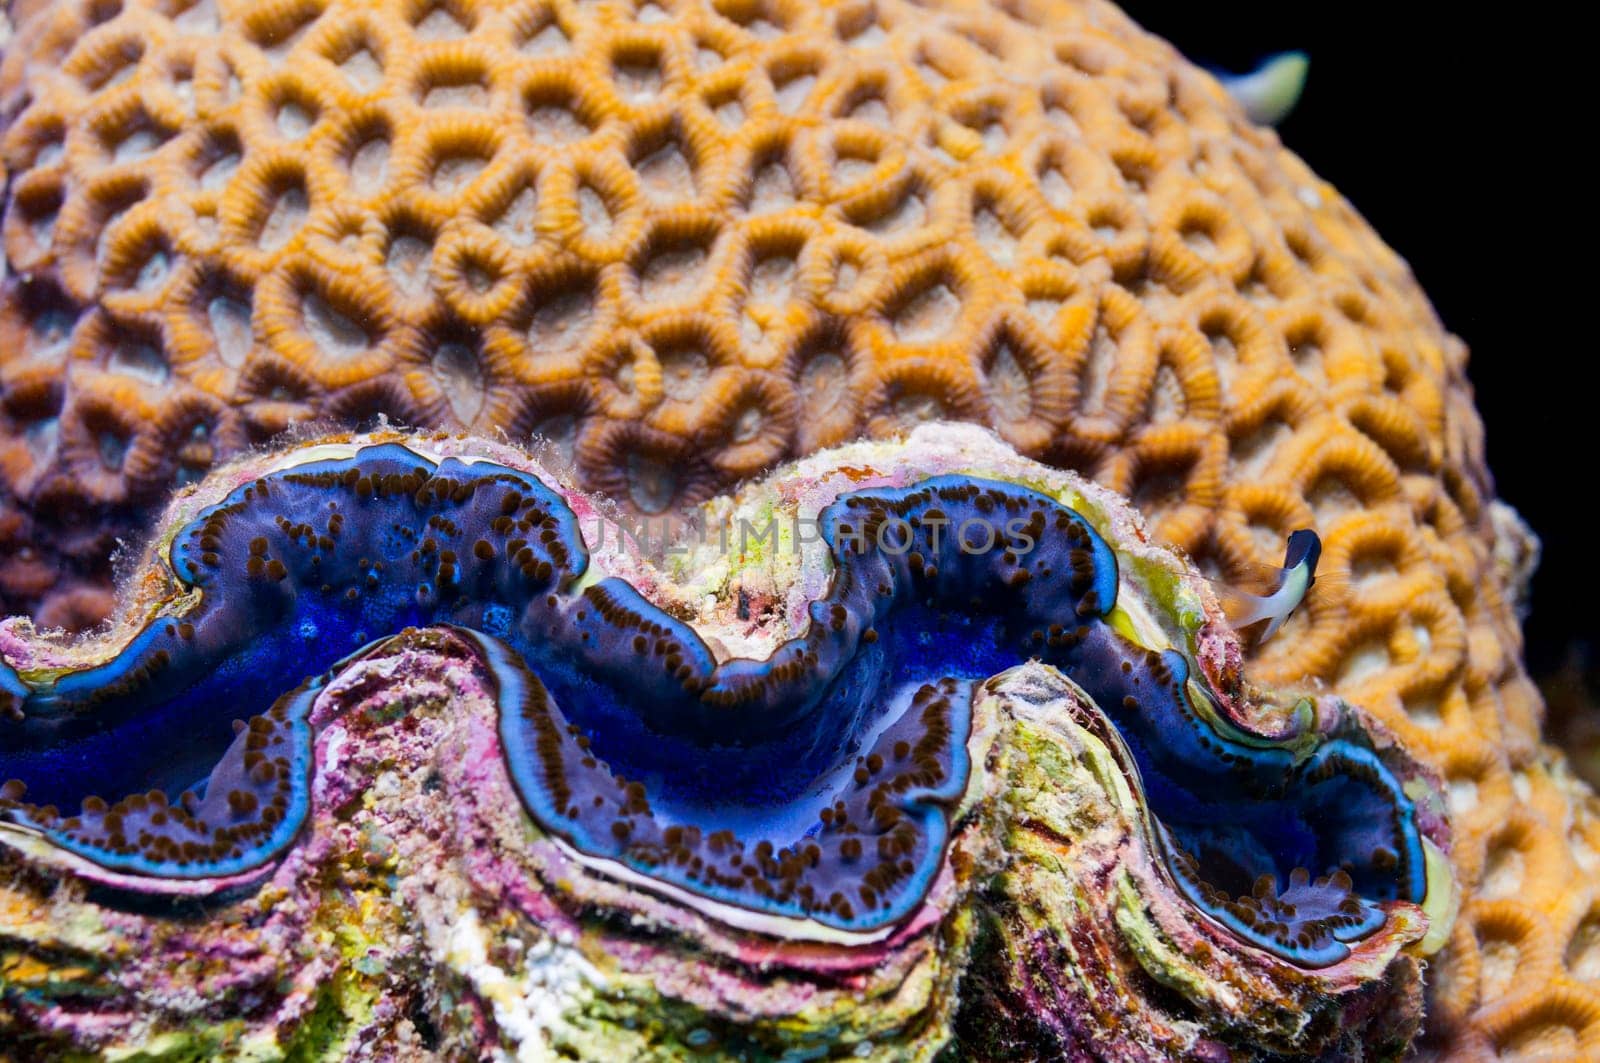 Red Sea blue giant clam close up portrait by AndreaIzzotti